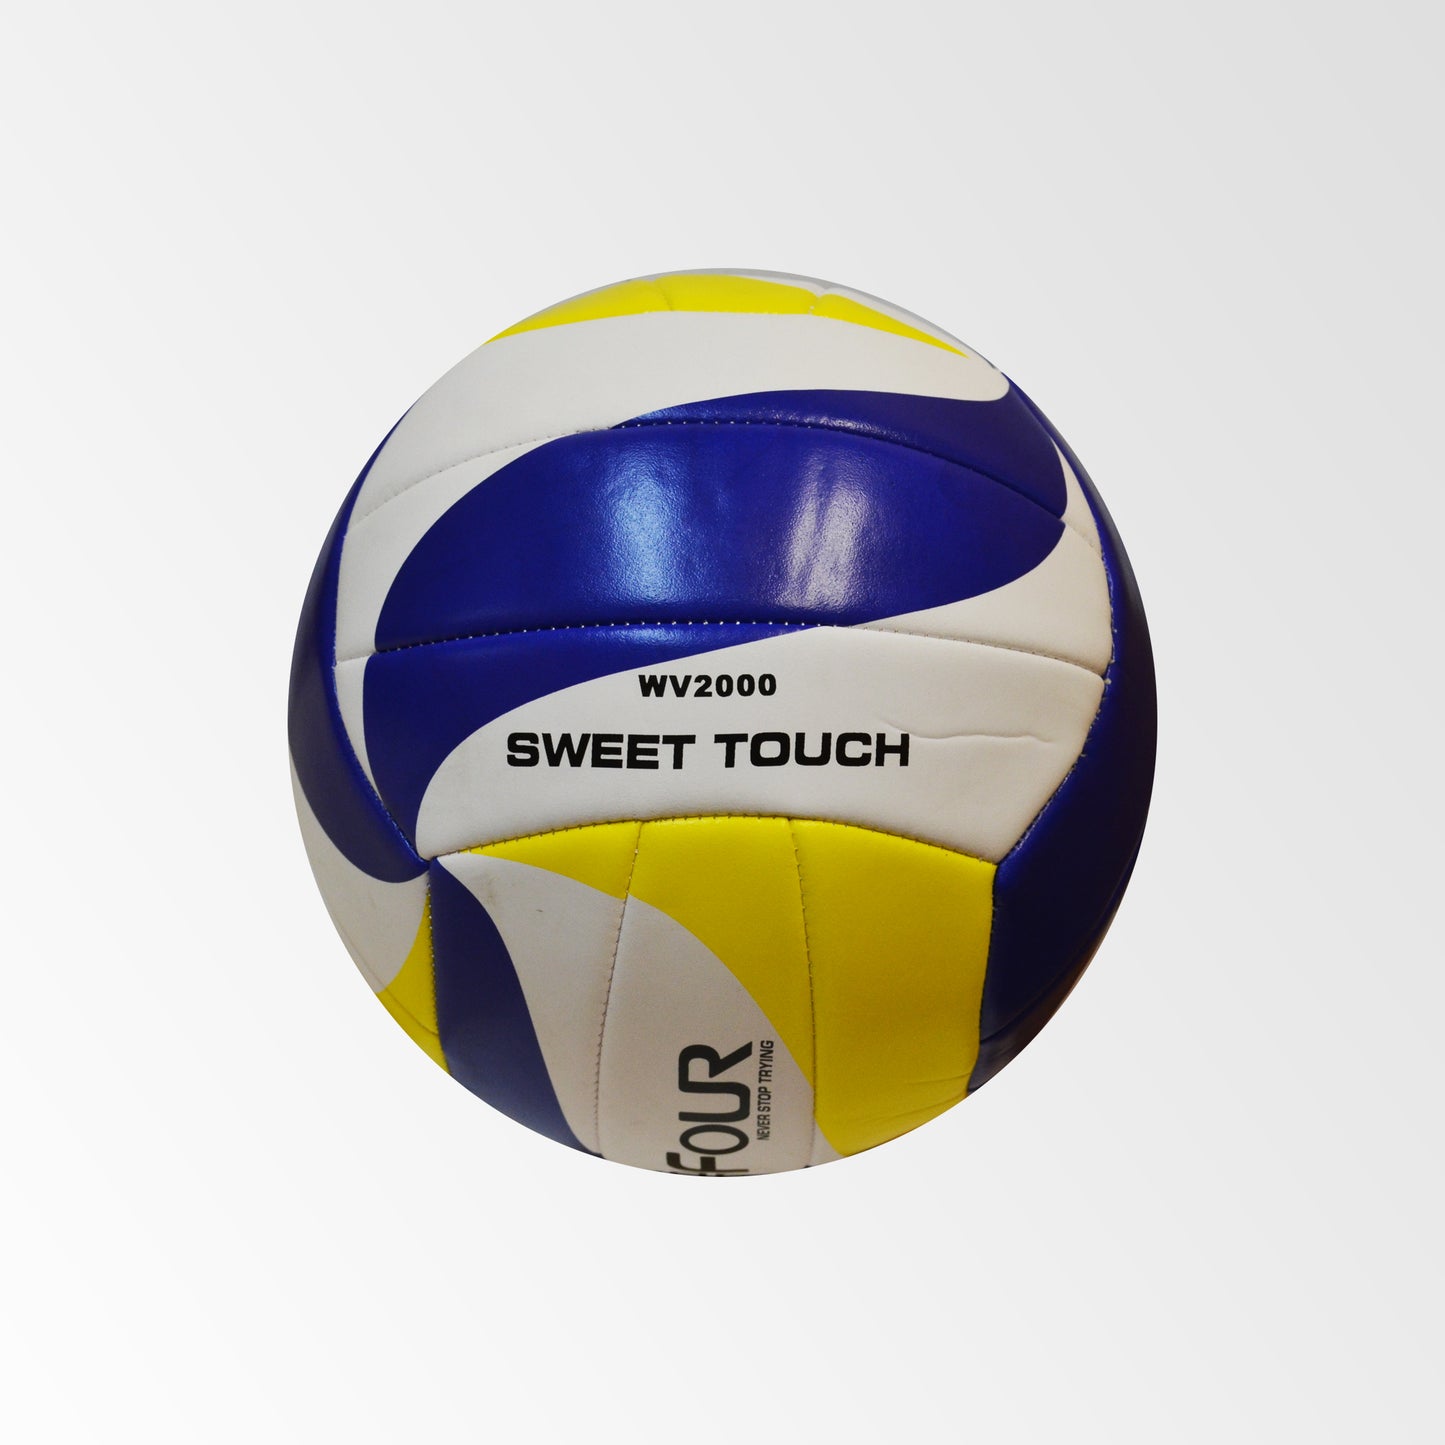 Balón Volley Nº5 Soft Touch Colores 809